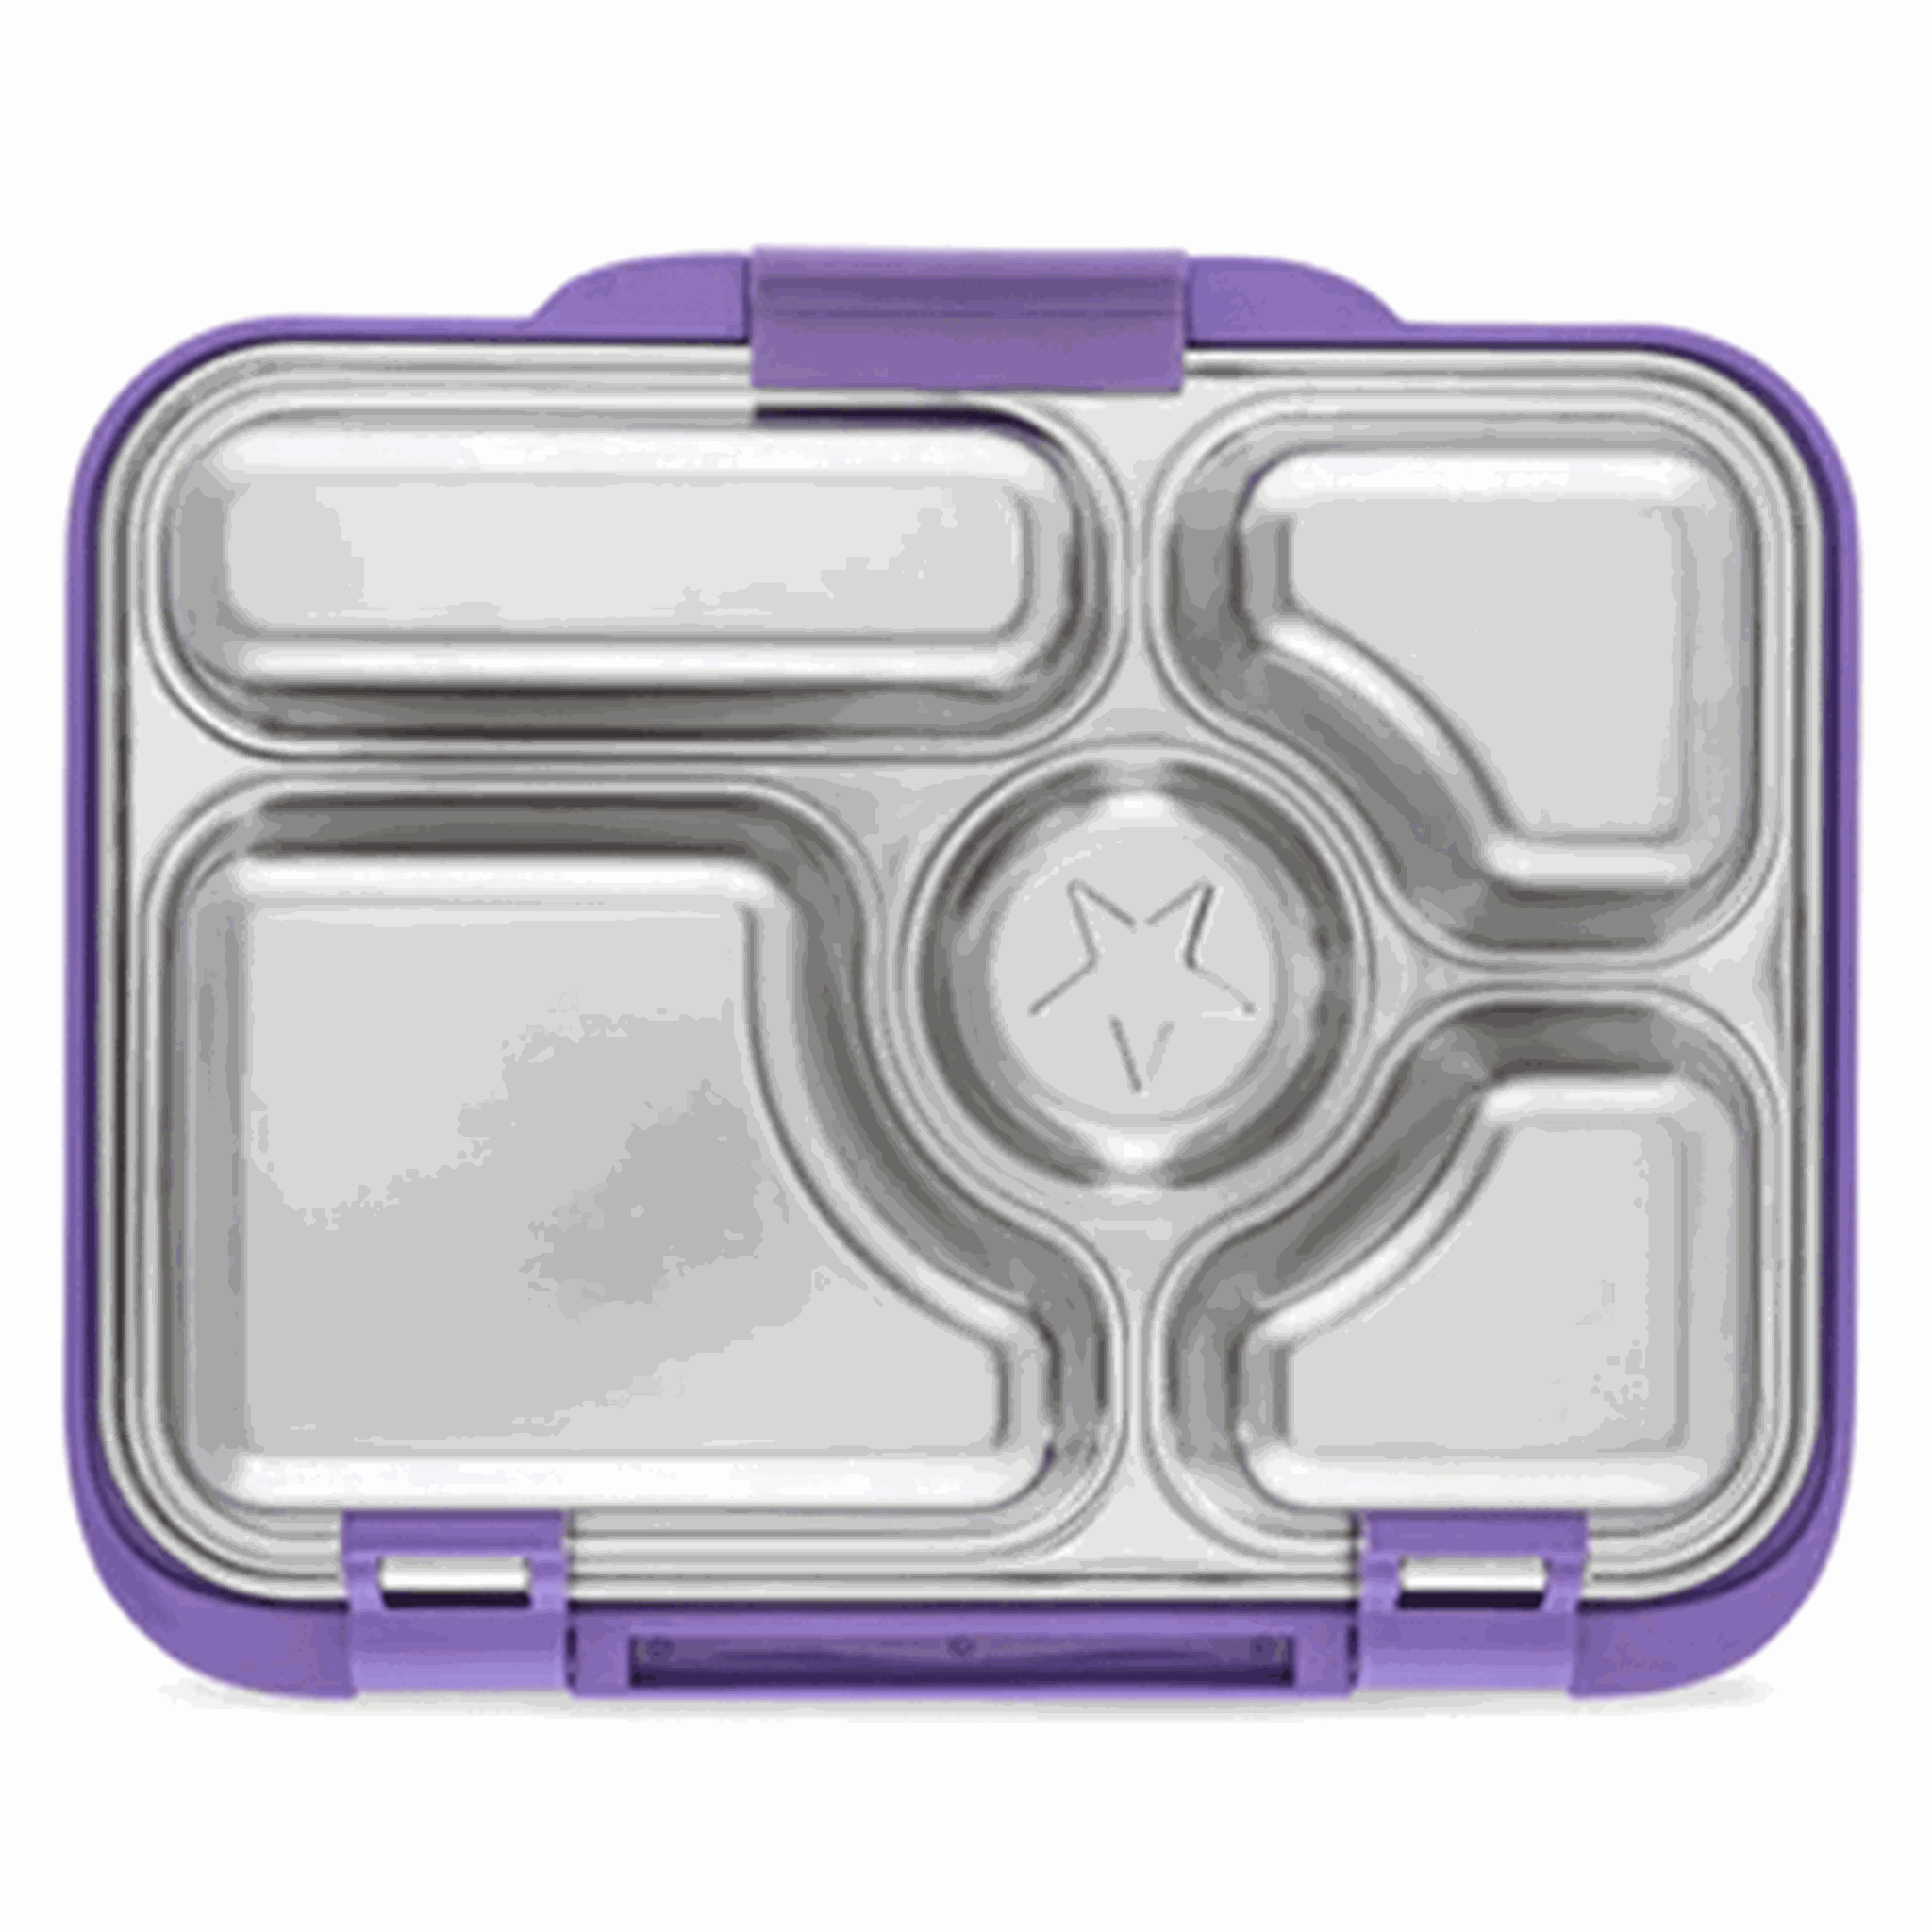 Yumbox Presto Stainless Steel Lunch Box Remy Lavender 6